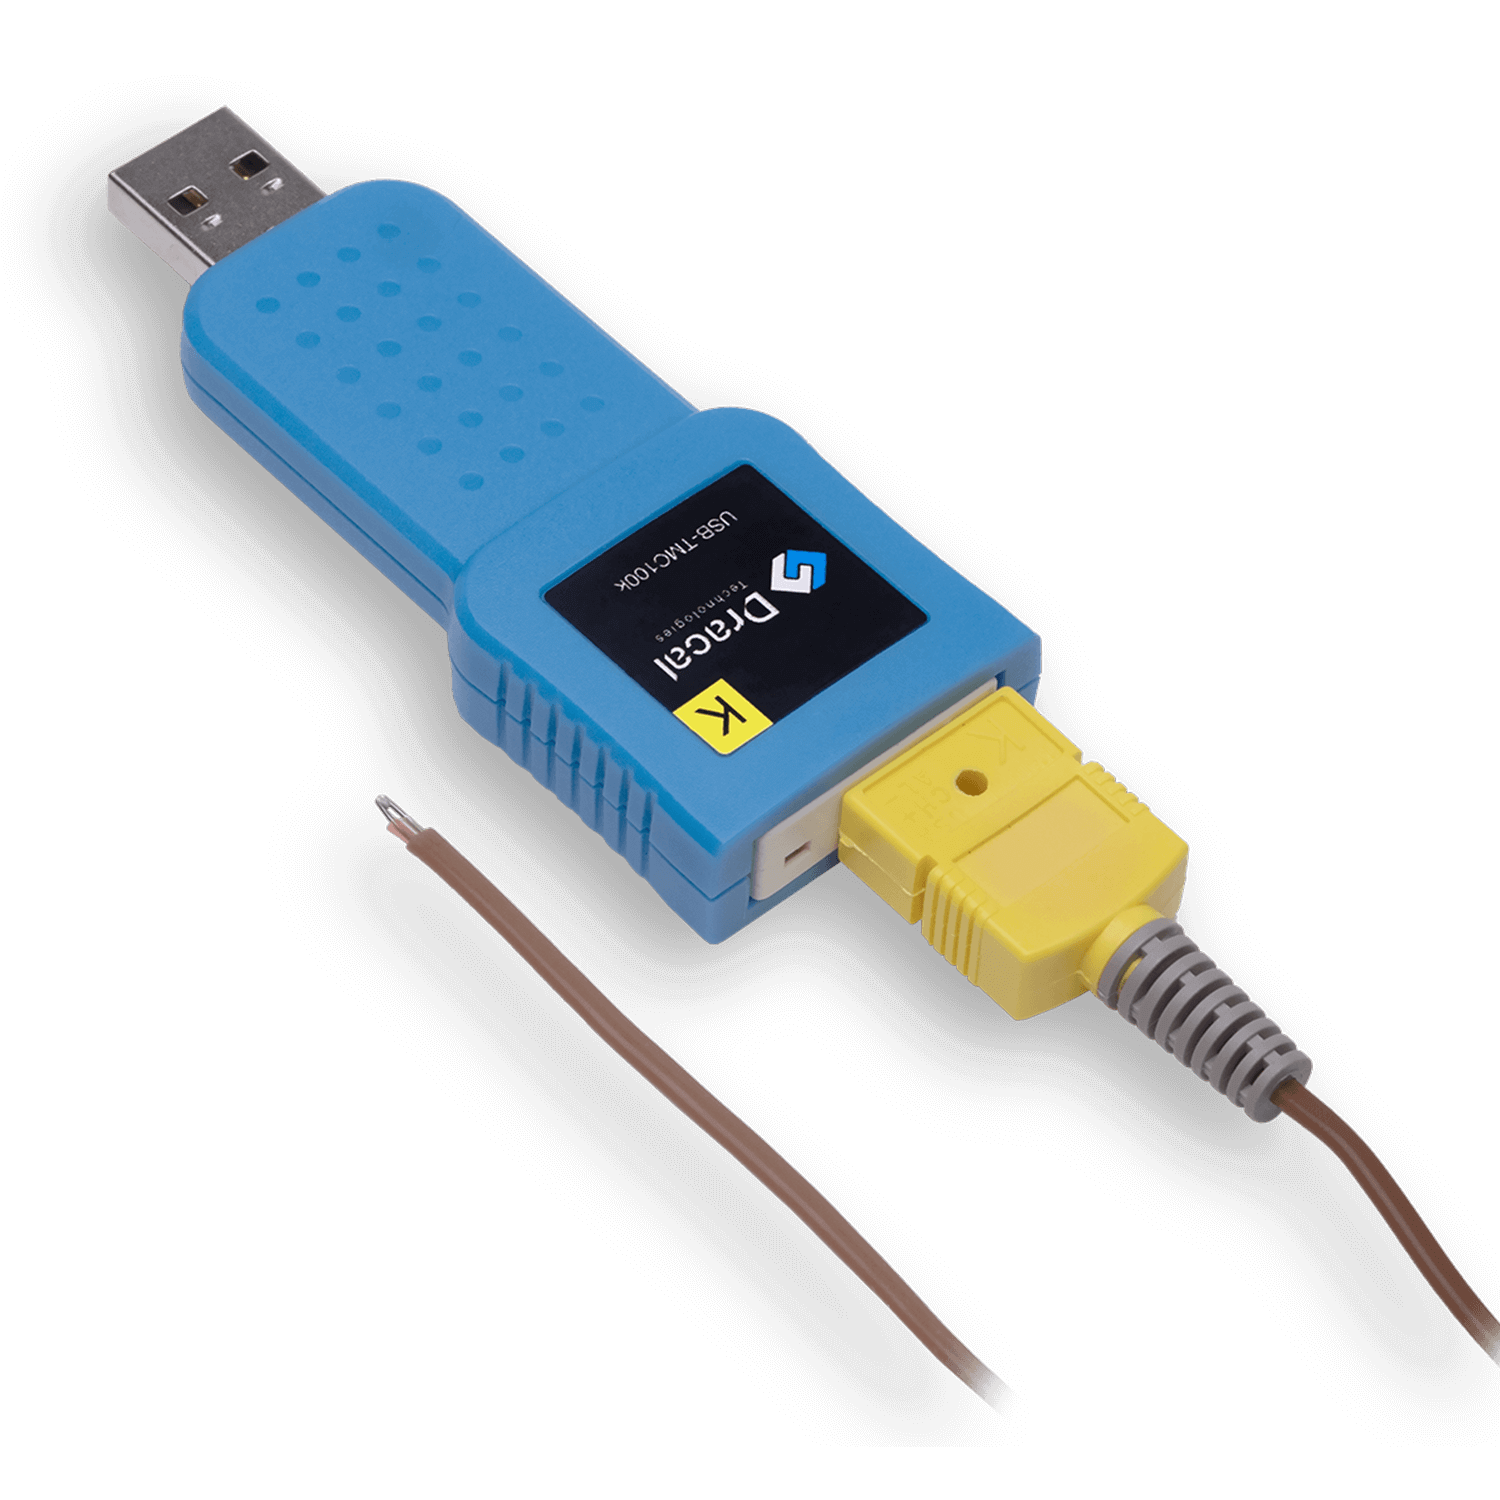 TMC100k: USB adapter for any type-K thermocouple for temperature measurement - Front view - With connected thermocouple